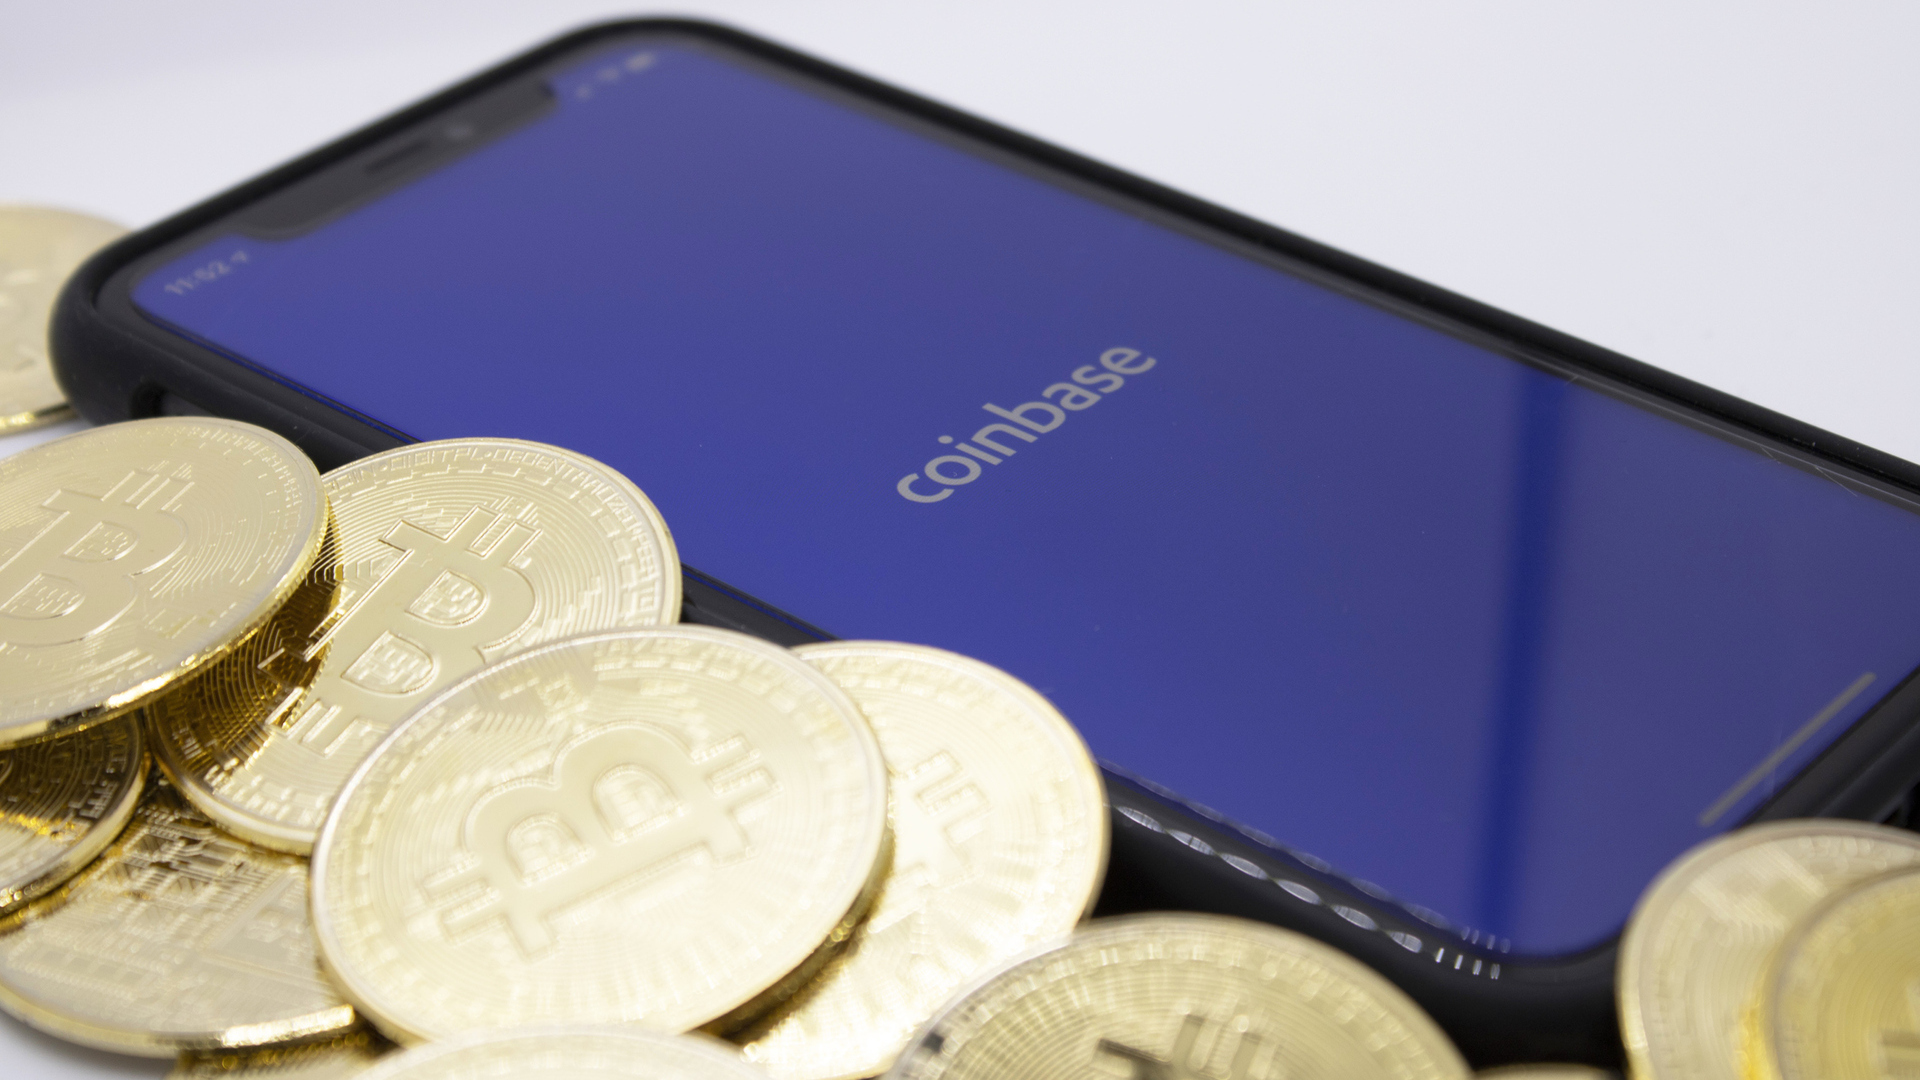 Coinbase Review Pros, Cons and How It Compares - NerdWallet